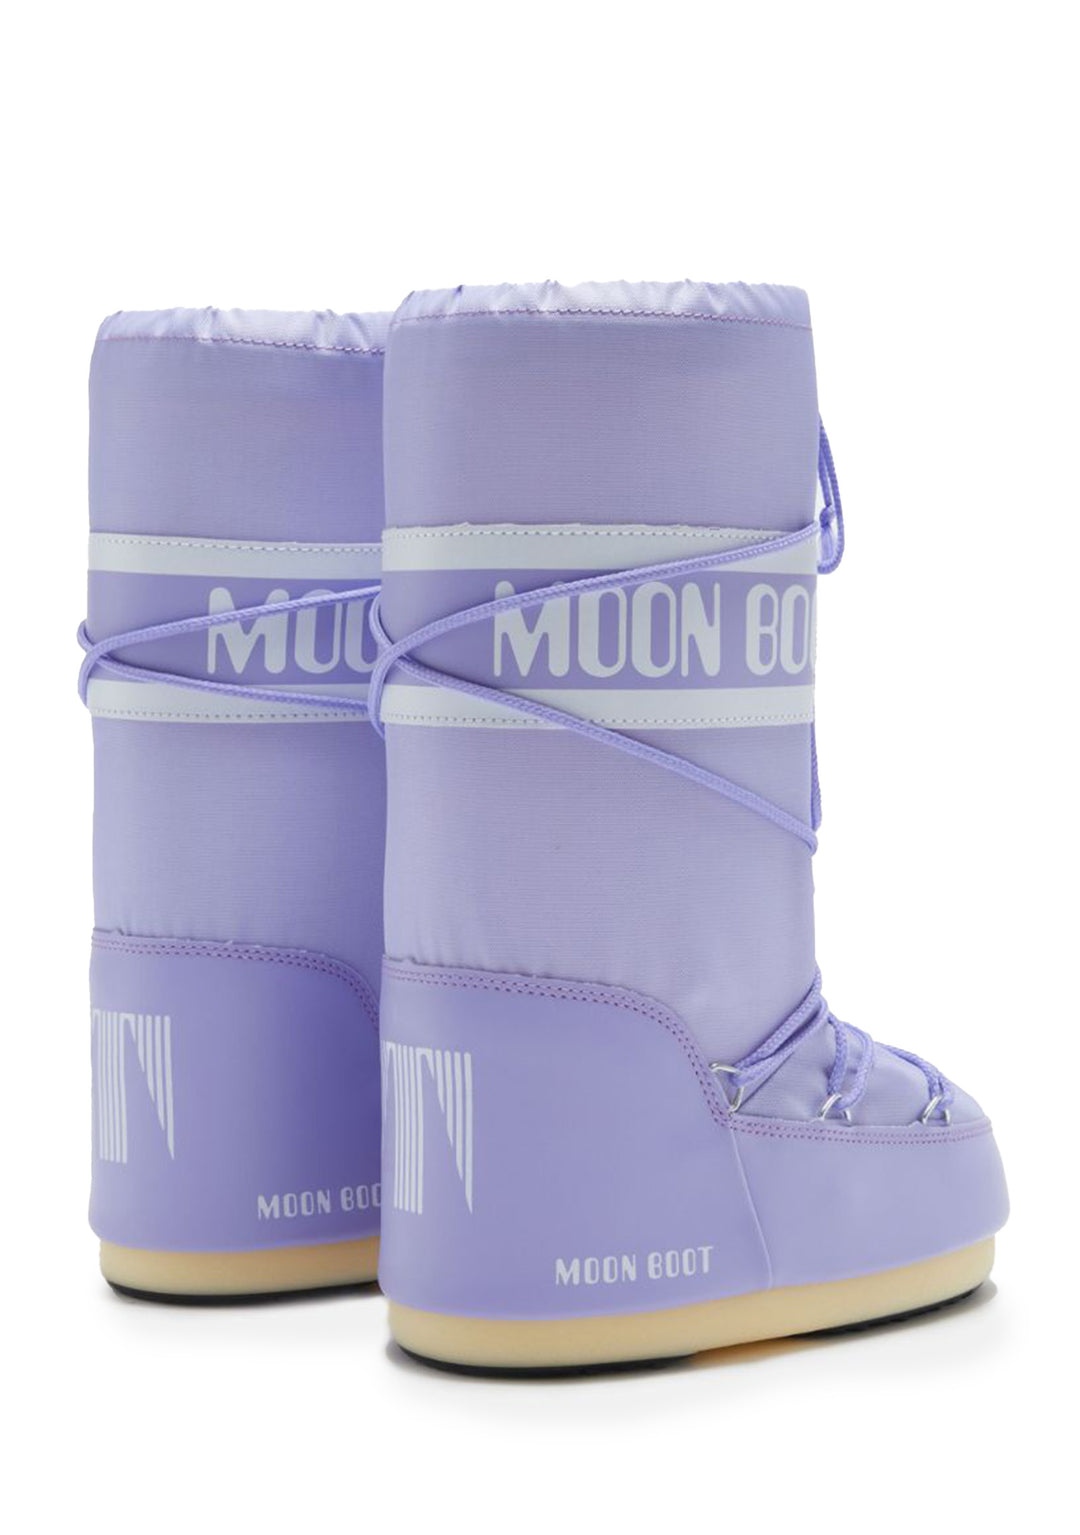 STIVALE UNISEX Lilac Moon Boot